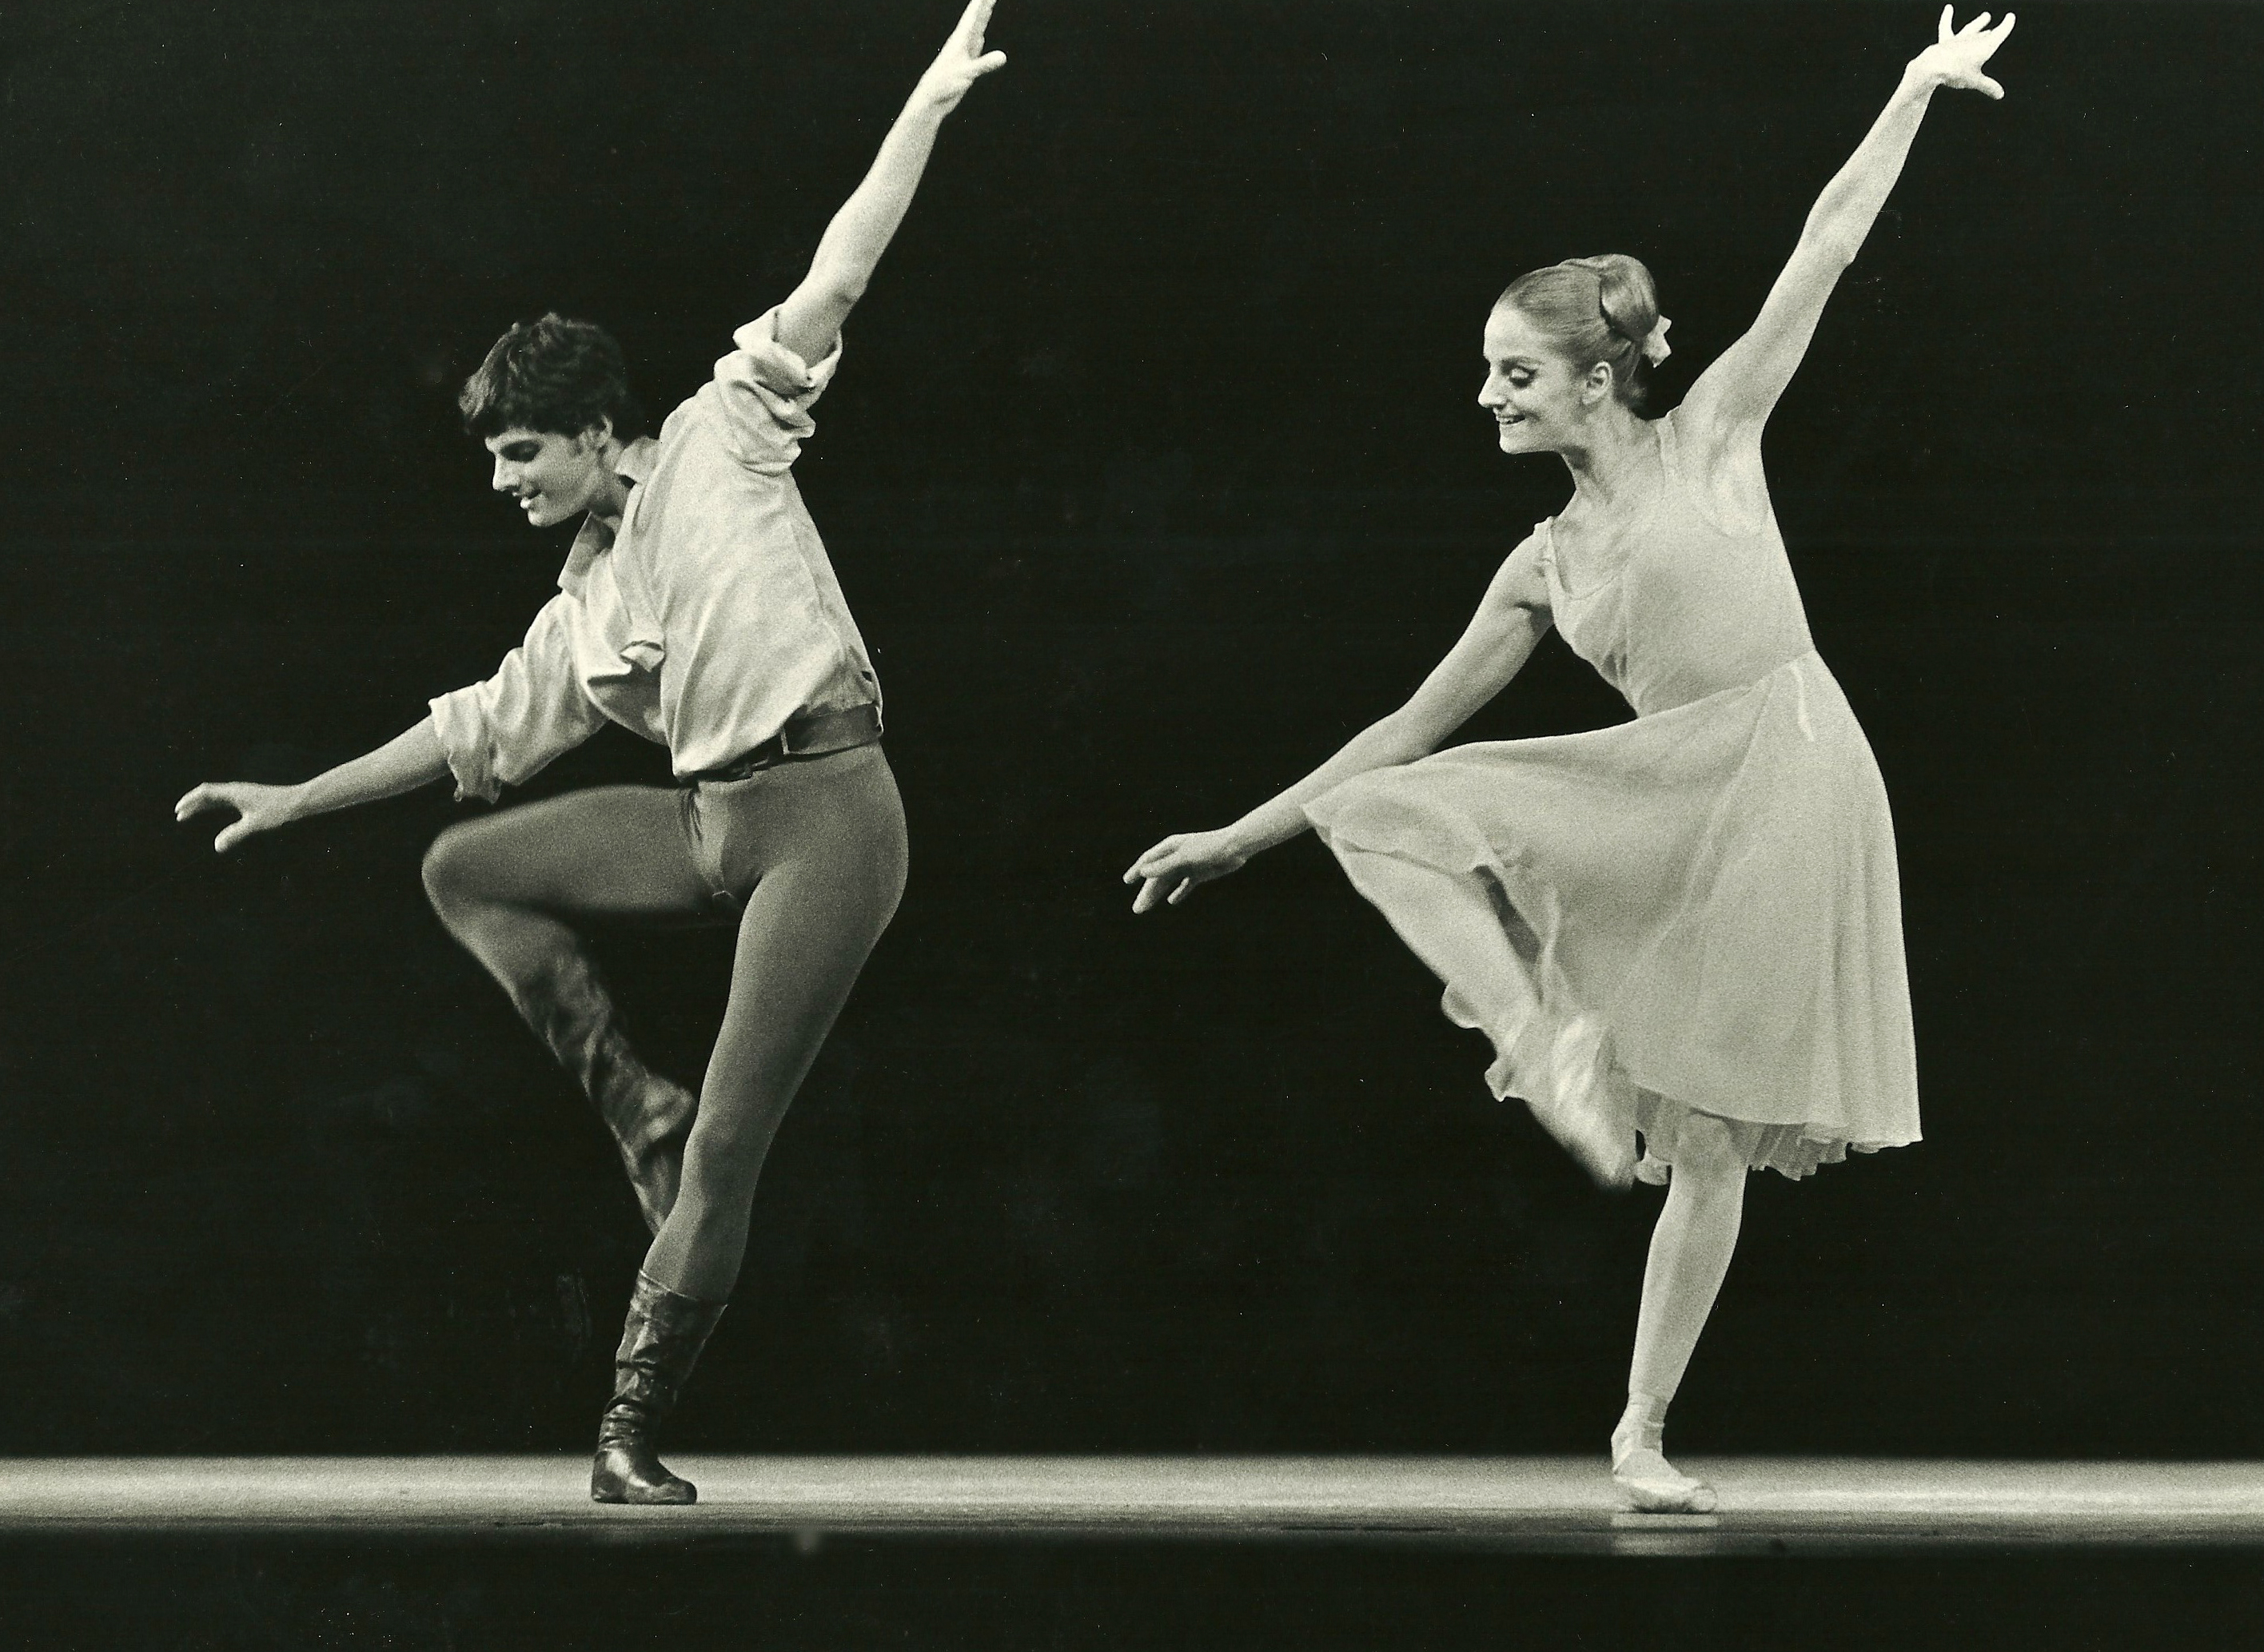 Me and Sara Leland in New York City Ballet's Jerome Robbins masterpiece, DANCES AT A GATHERING (original cast)